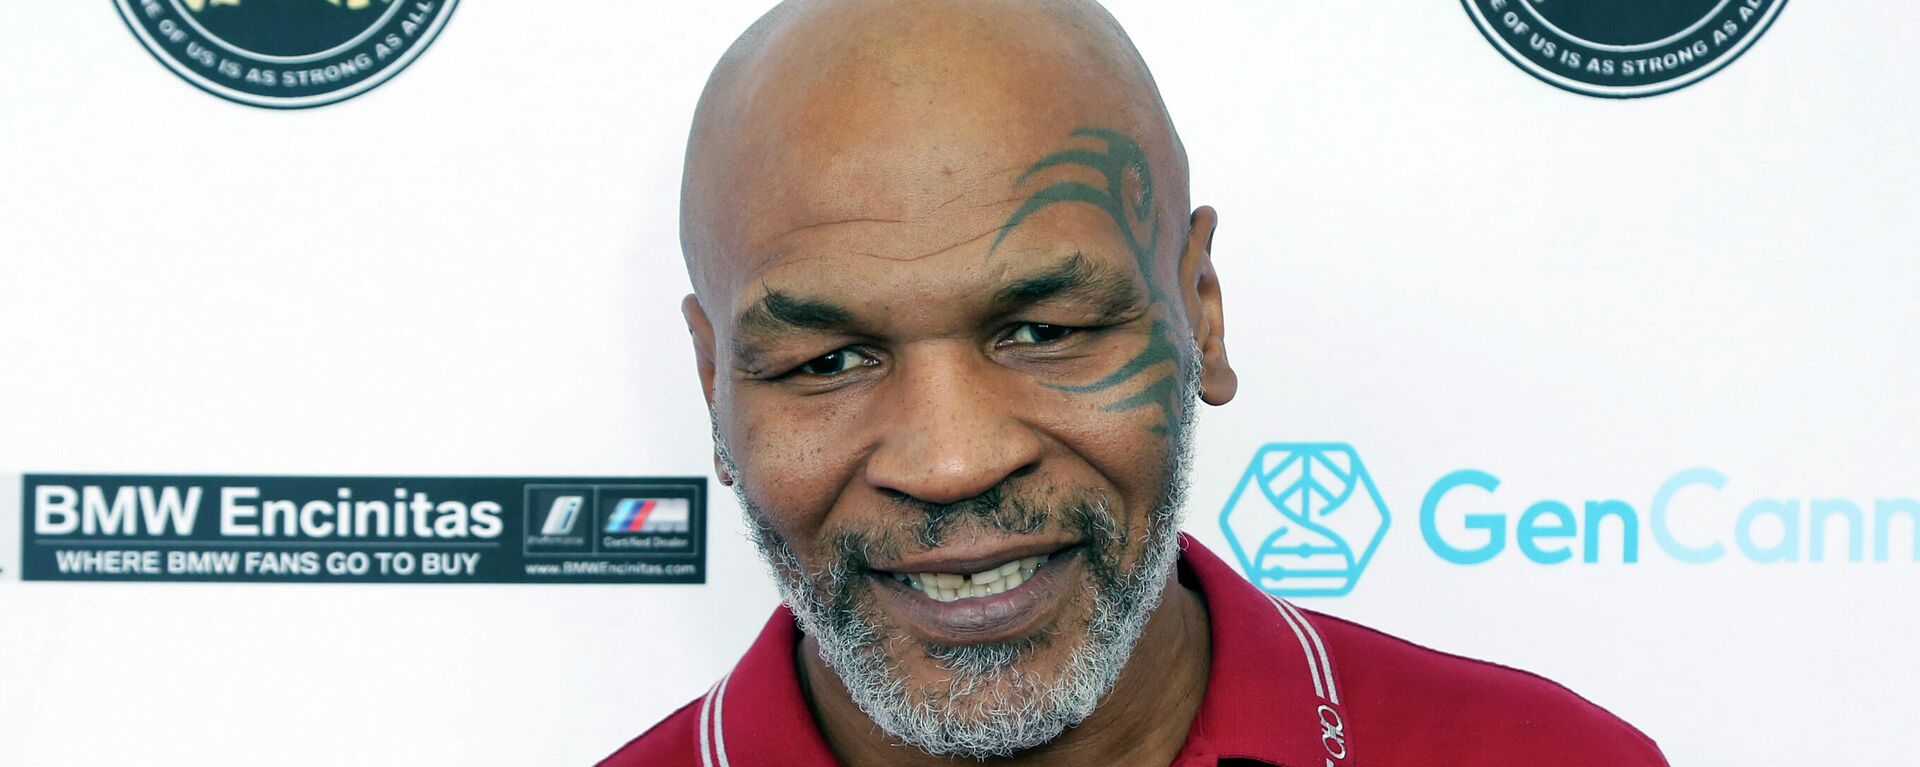 In this Aug. 2, 2019, file photo, Mike Tyson attends a celebrity golf tournament in Dana Point, Calif. - Sputnik International, 1920, 10.06.2022